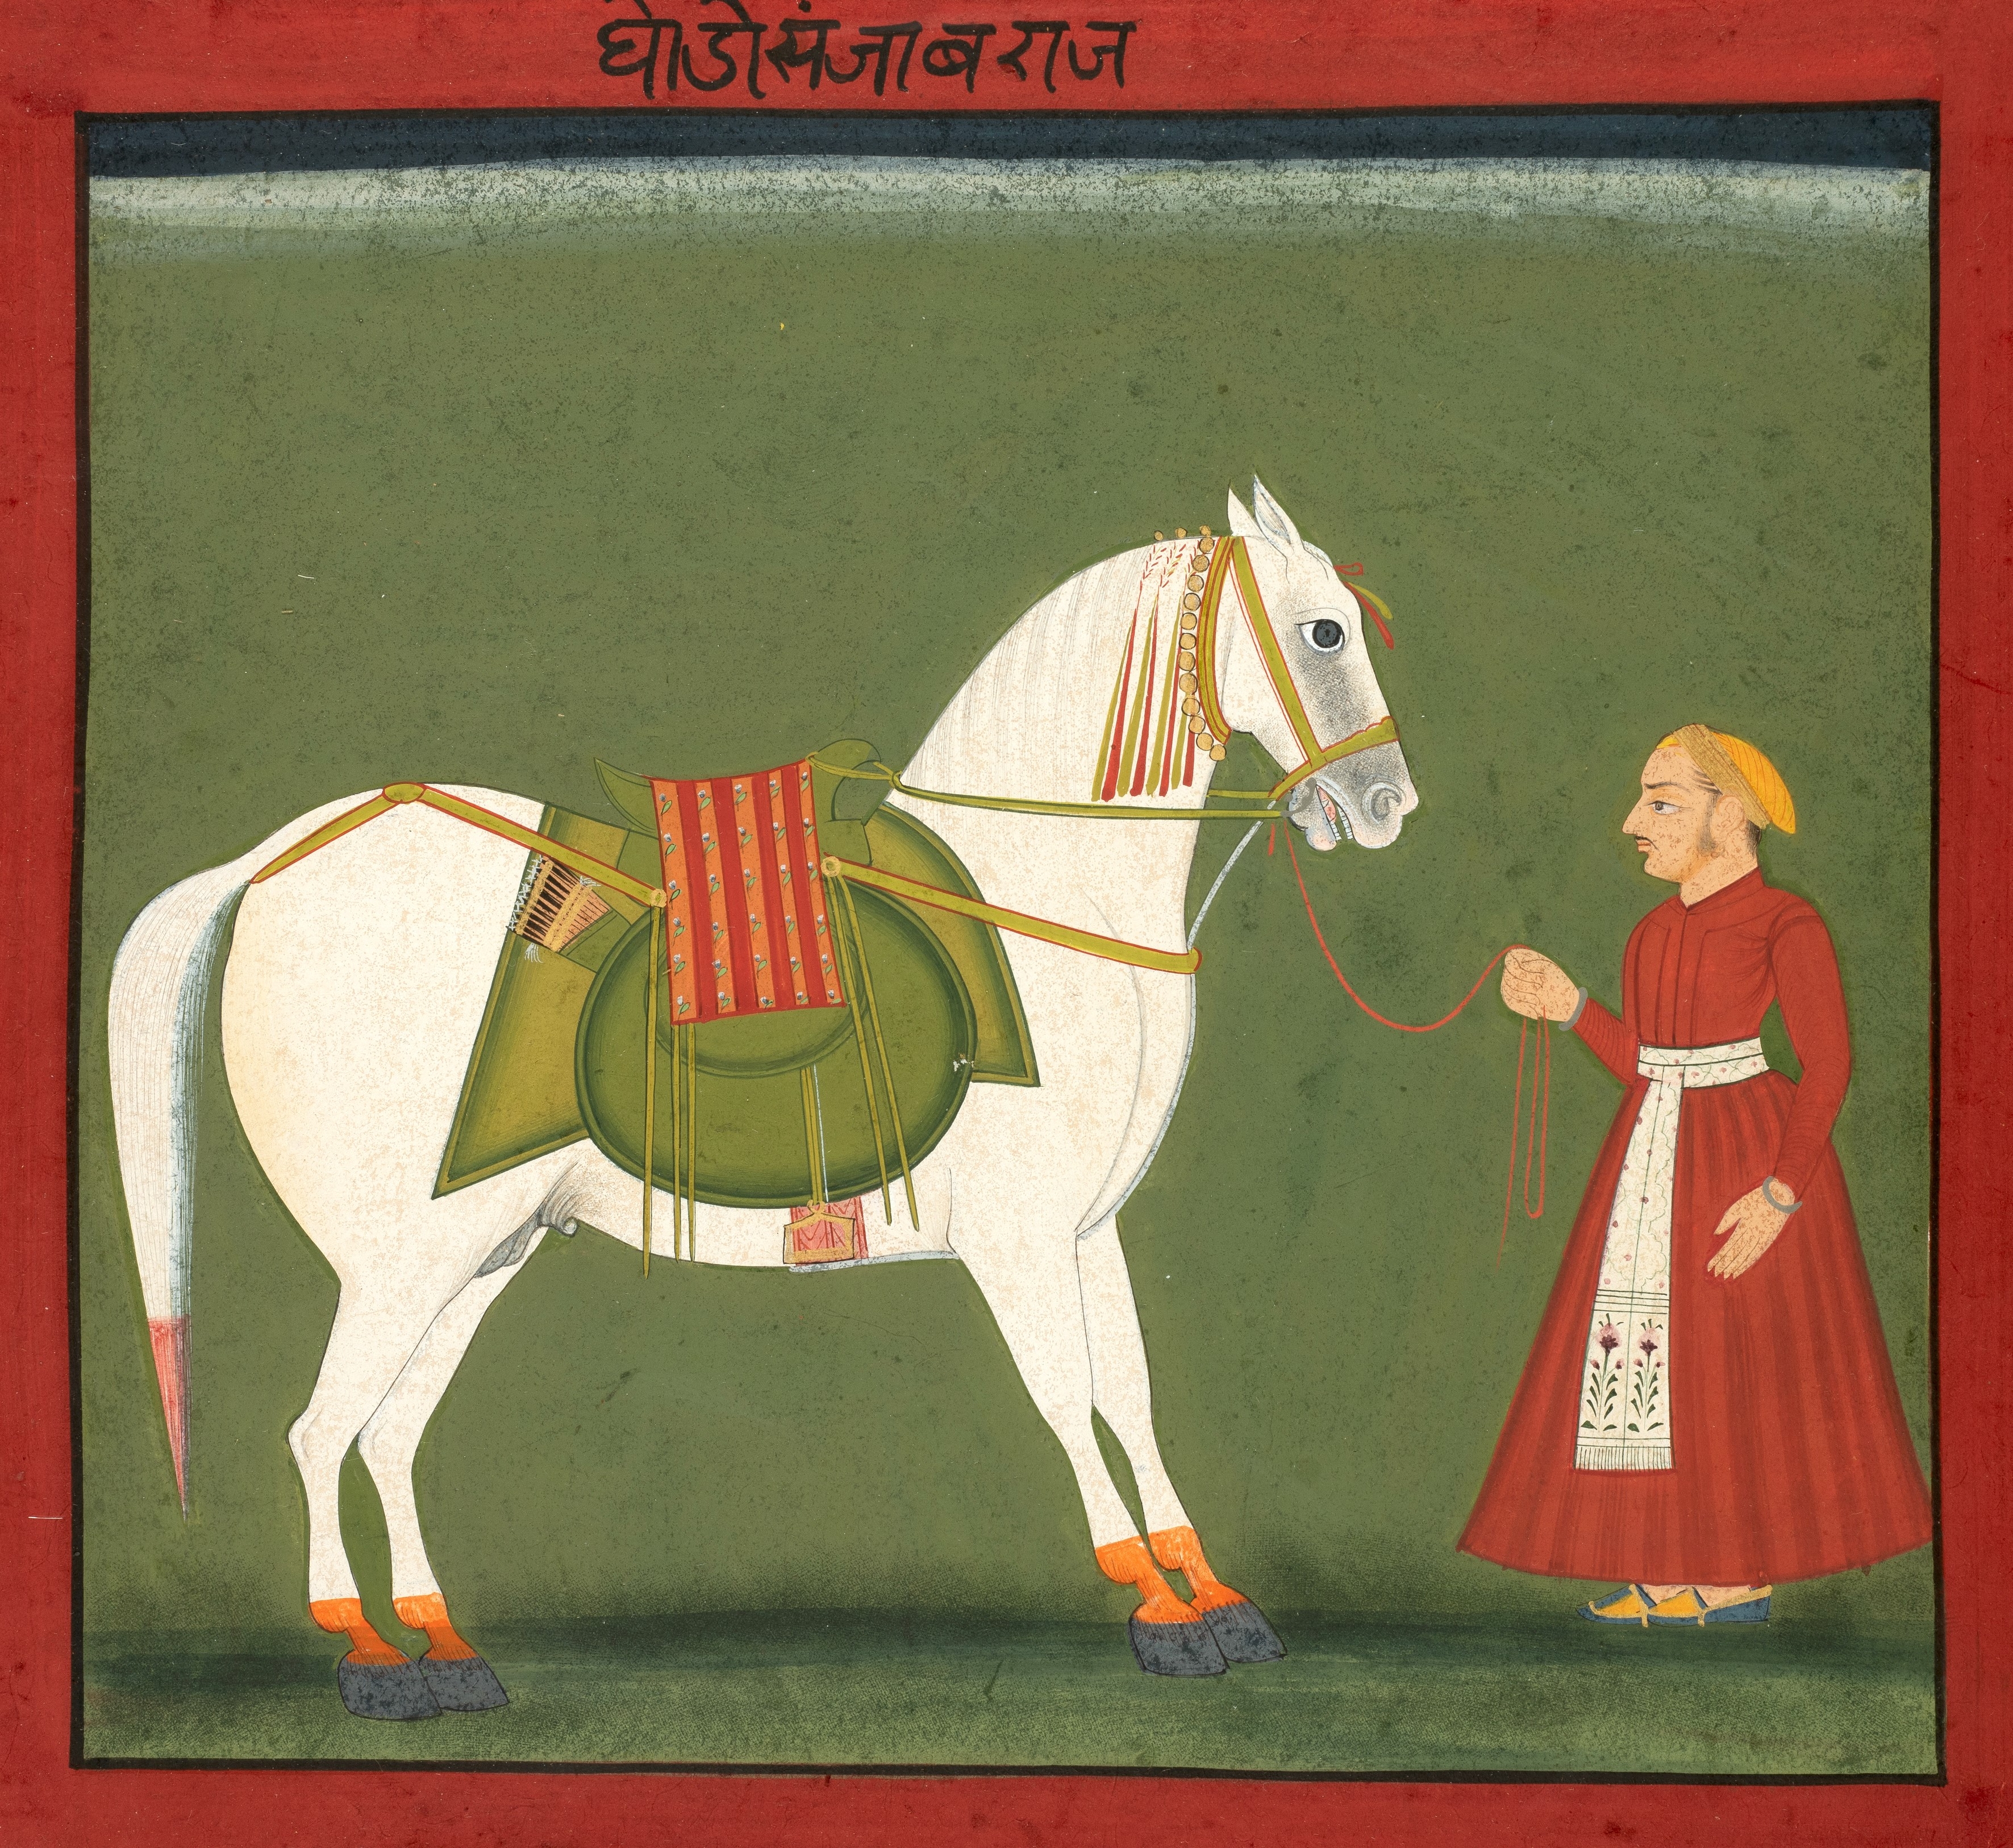 PORTRAIT OF A HORSE WITH ITS GROOM by Rajasthan School, 19th Century, CIRCA 1800